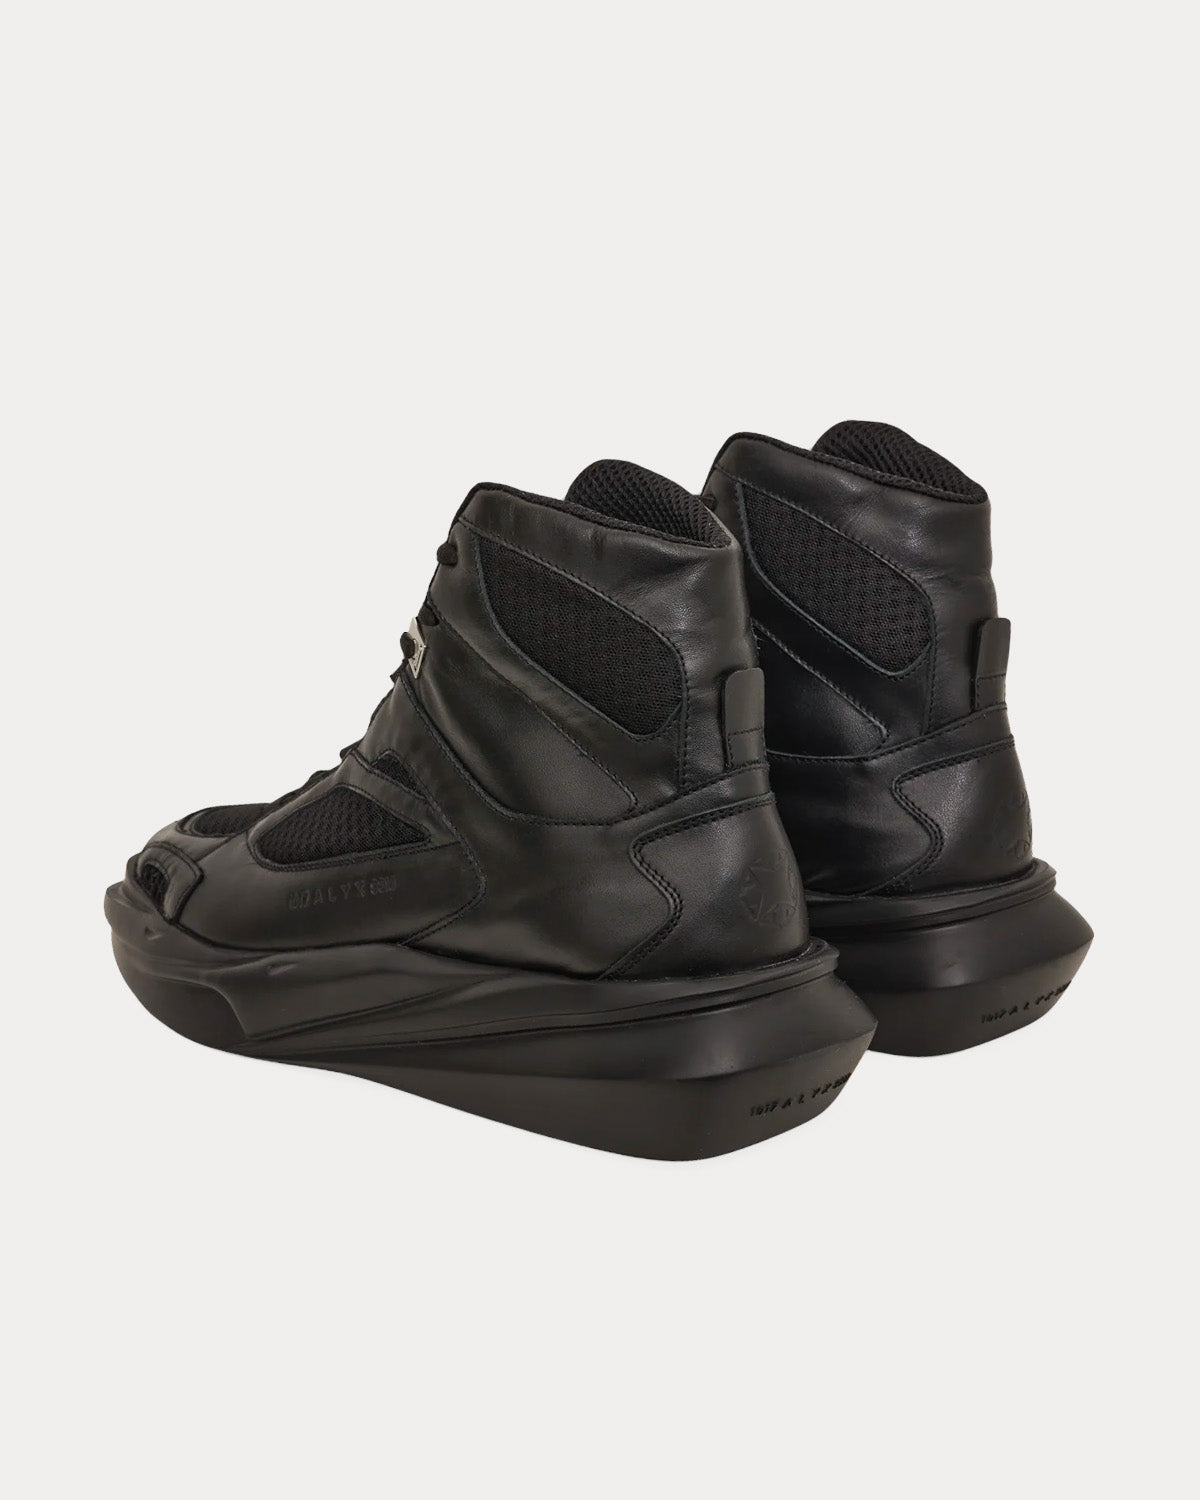 1017 ALYX 9SM - Mono Hiking Boot Black High Top Sneakers